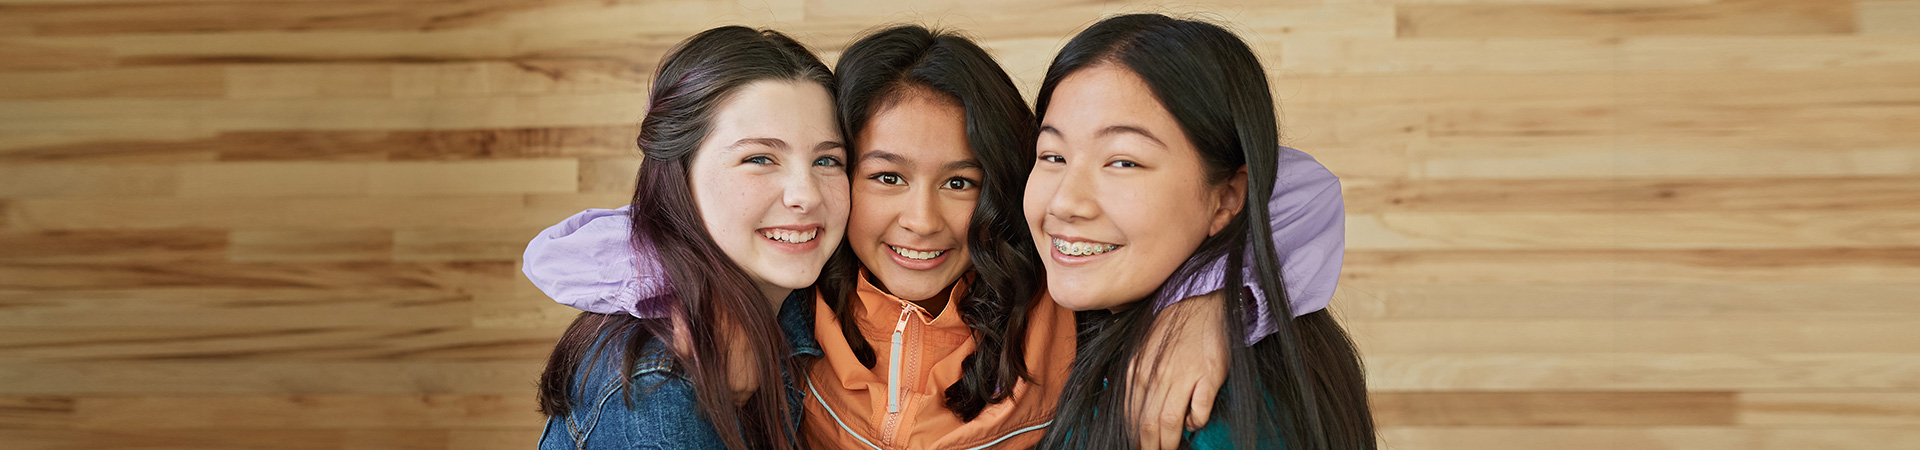  group of girl scouts smiling and hugging 